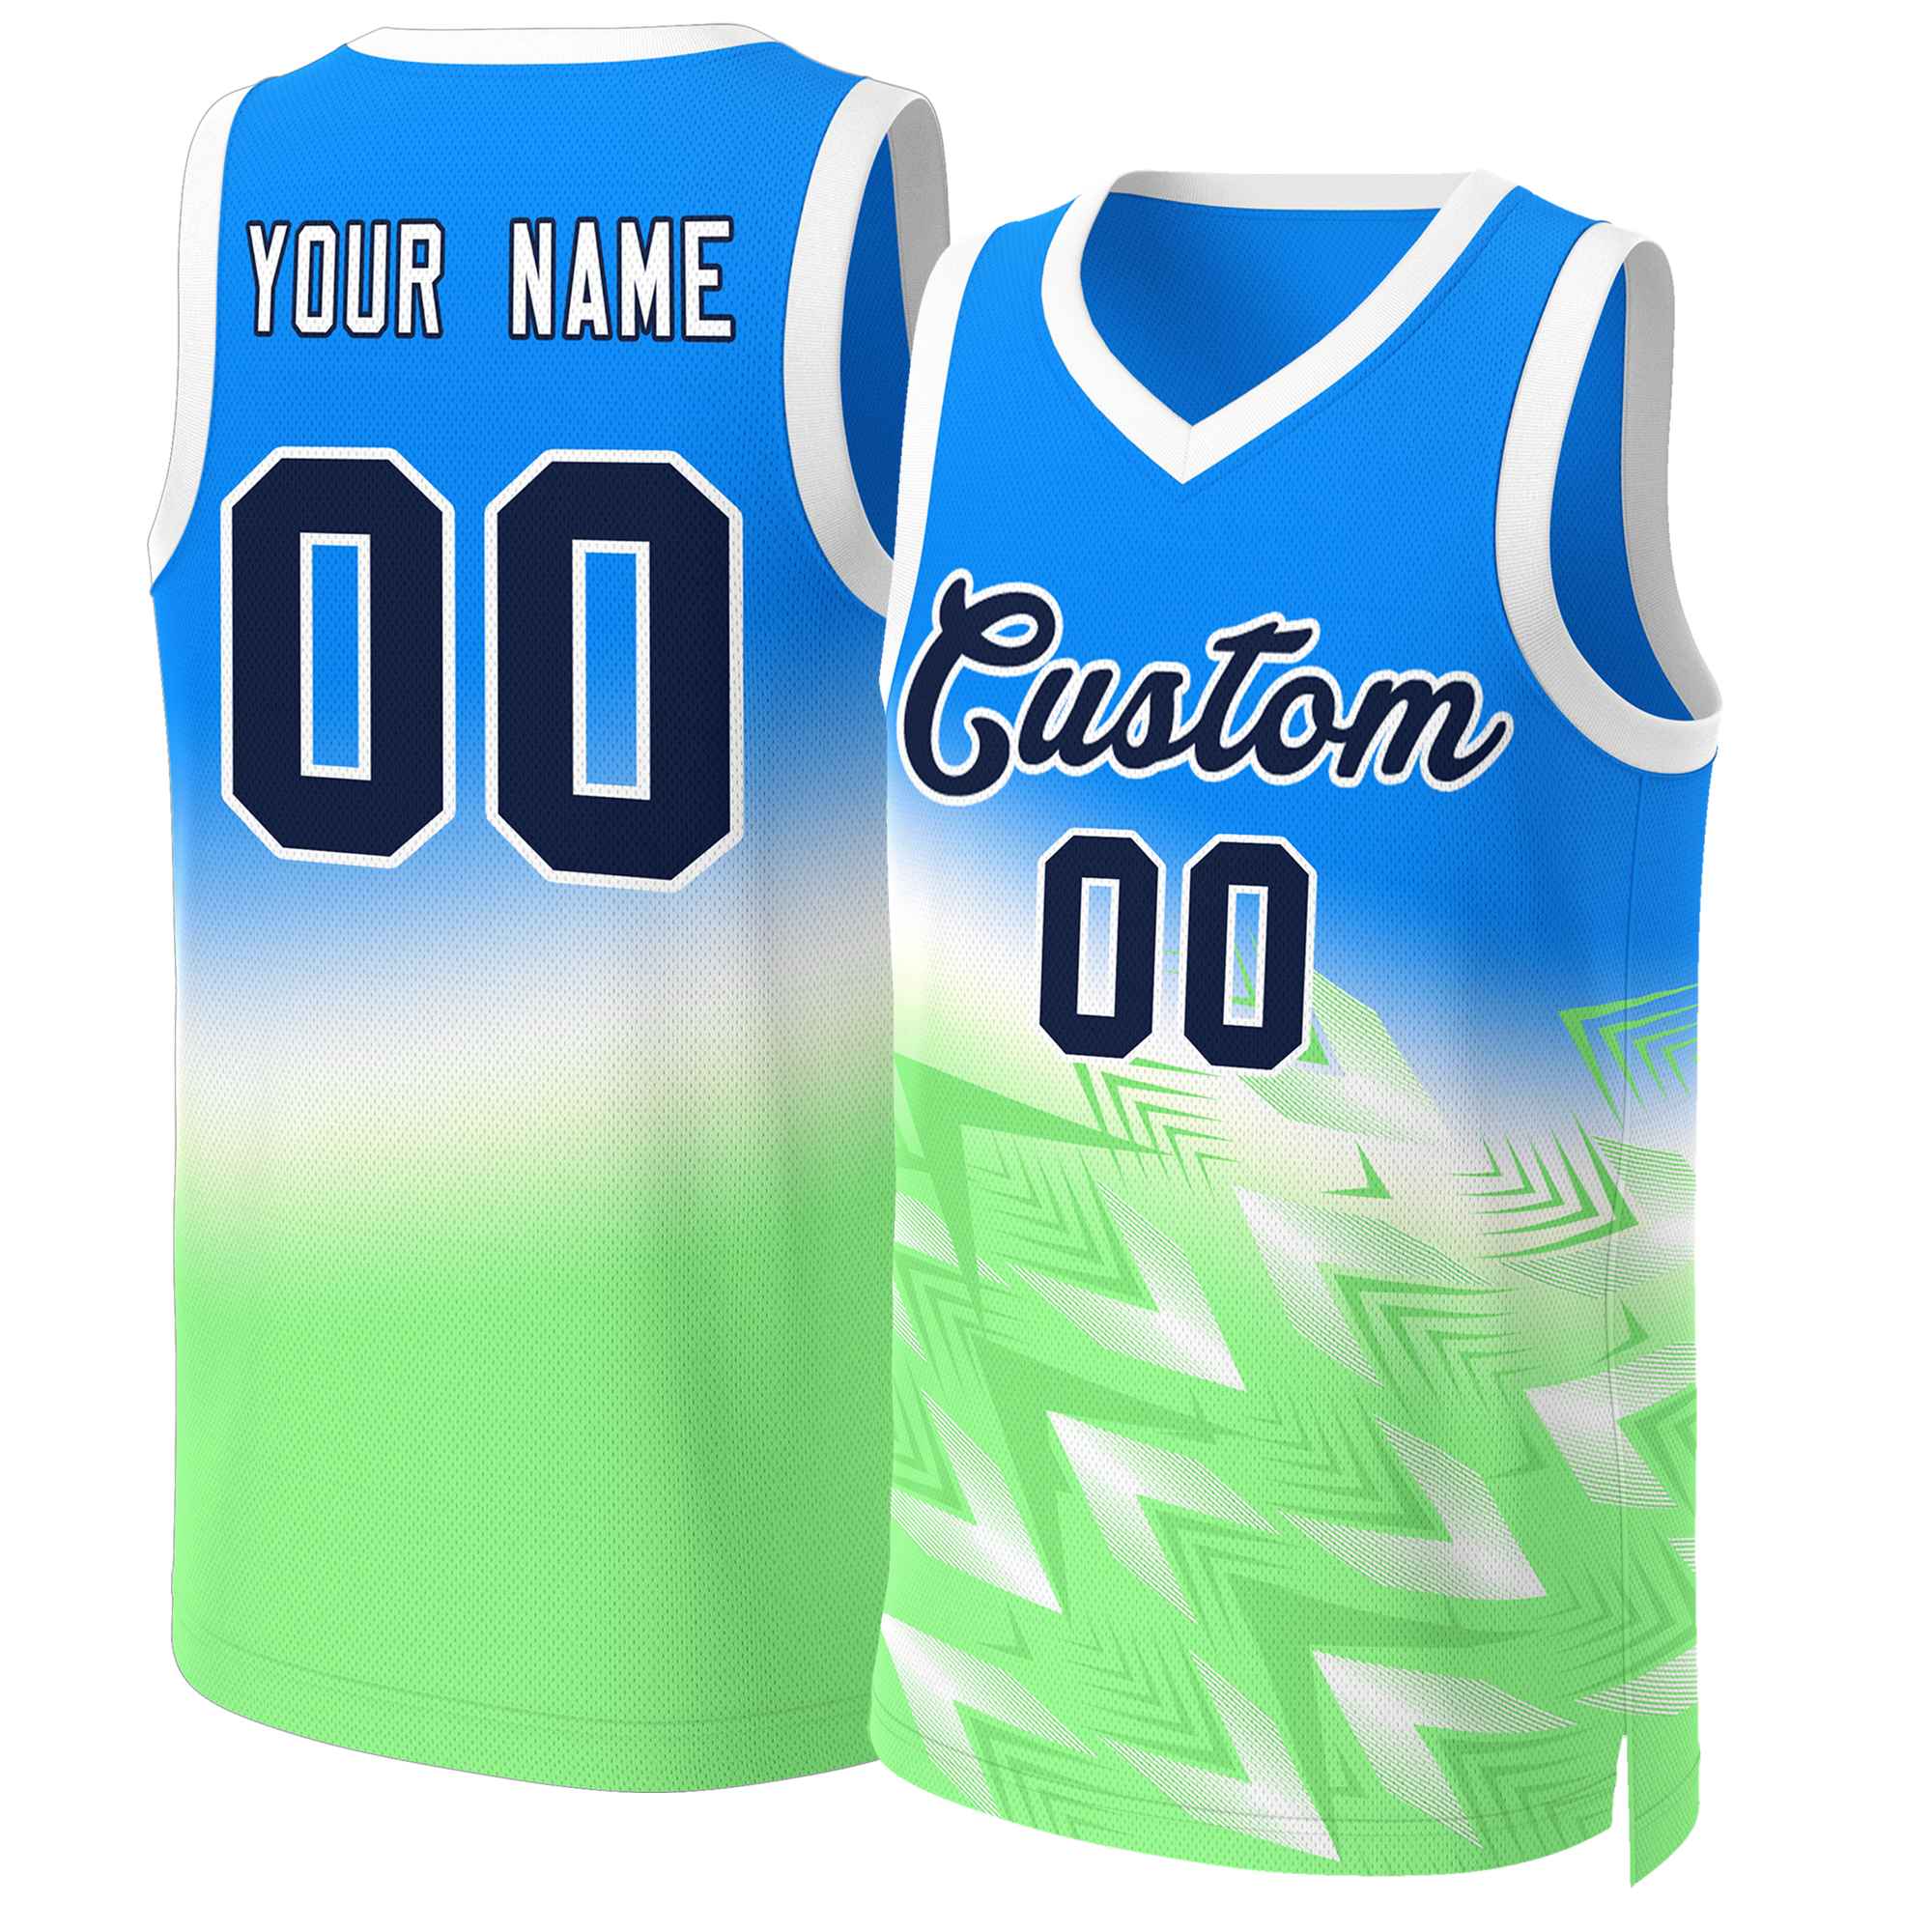 Gradient Stripe Blue Personalized Basketball Uniforms | YoungSpeeds Mens